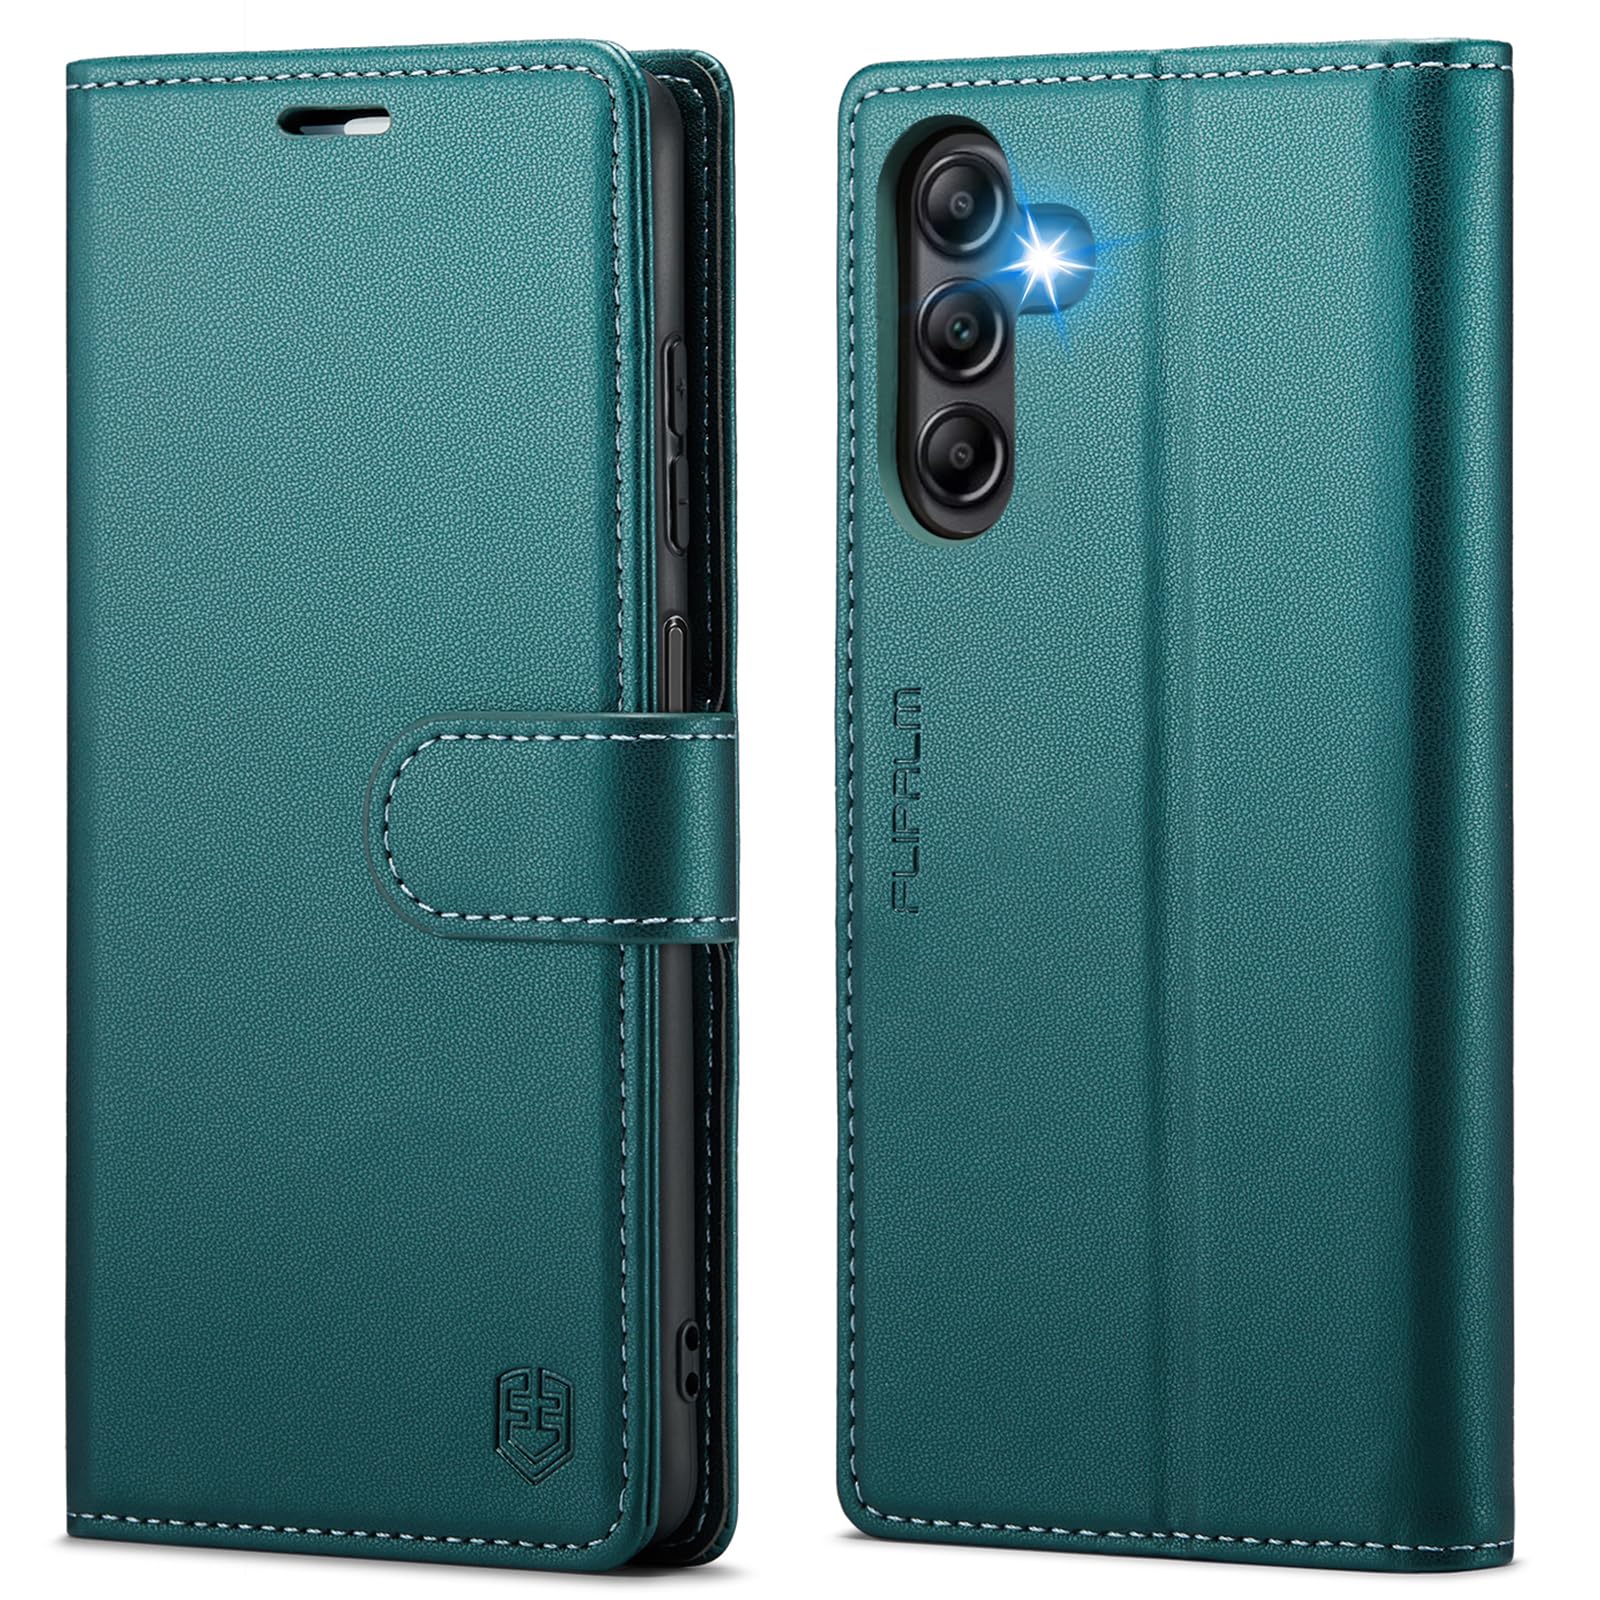 FLIPALM for Samsung Galaxy A14 5G Wallet Case with RFID Blocking Credit Card Holder, PU Leather Folio Flip Kickstand Protective Shockproof Cover Women Men for Samsung A14 Phone case(Blue-Green)